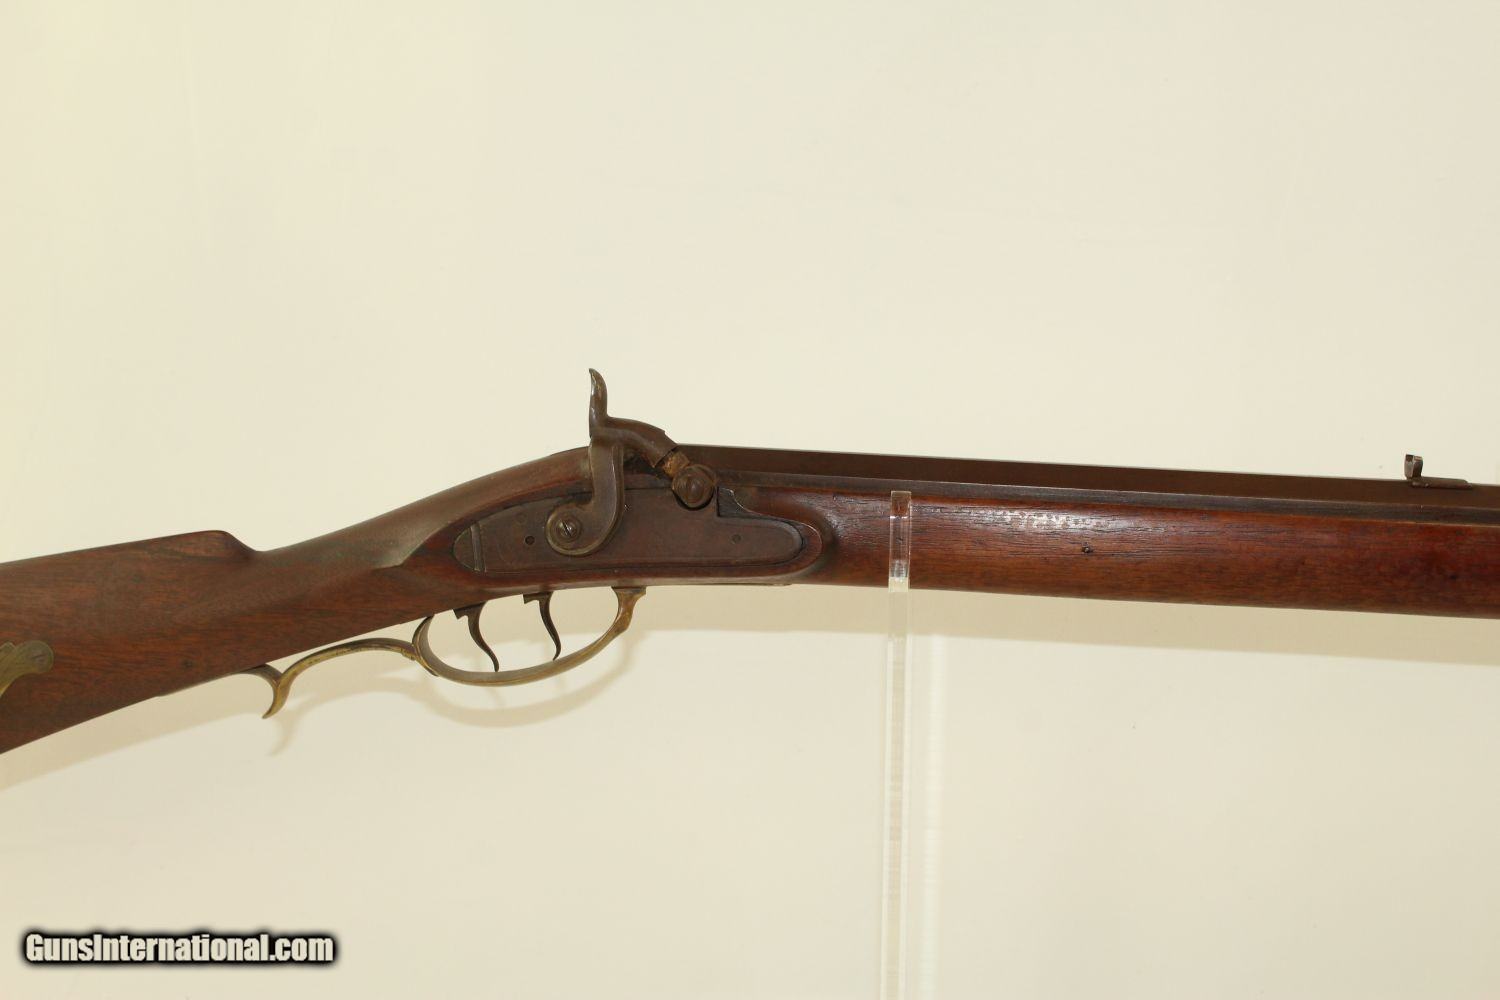 KENTUCKY Style AMERICAN LONG RIFLE Full-Stock Percussion Rifle Manufactured  Circa the 1850s